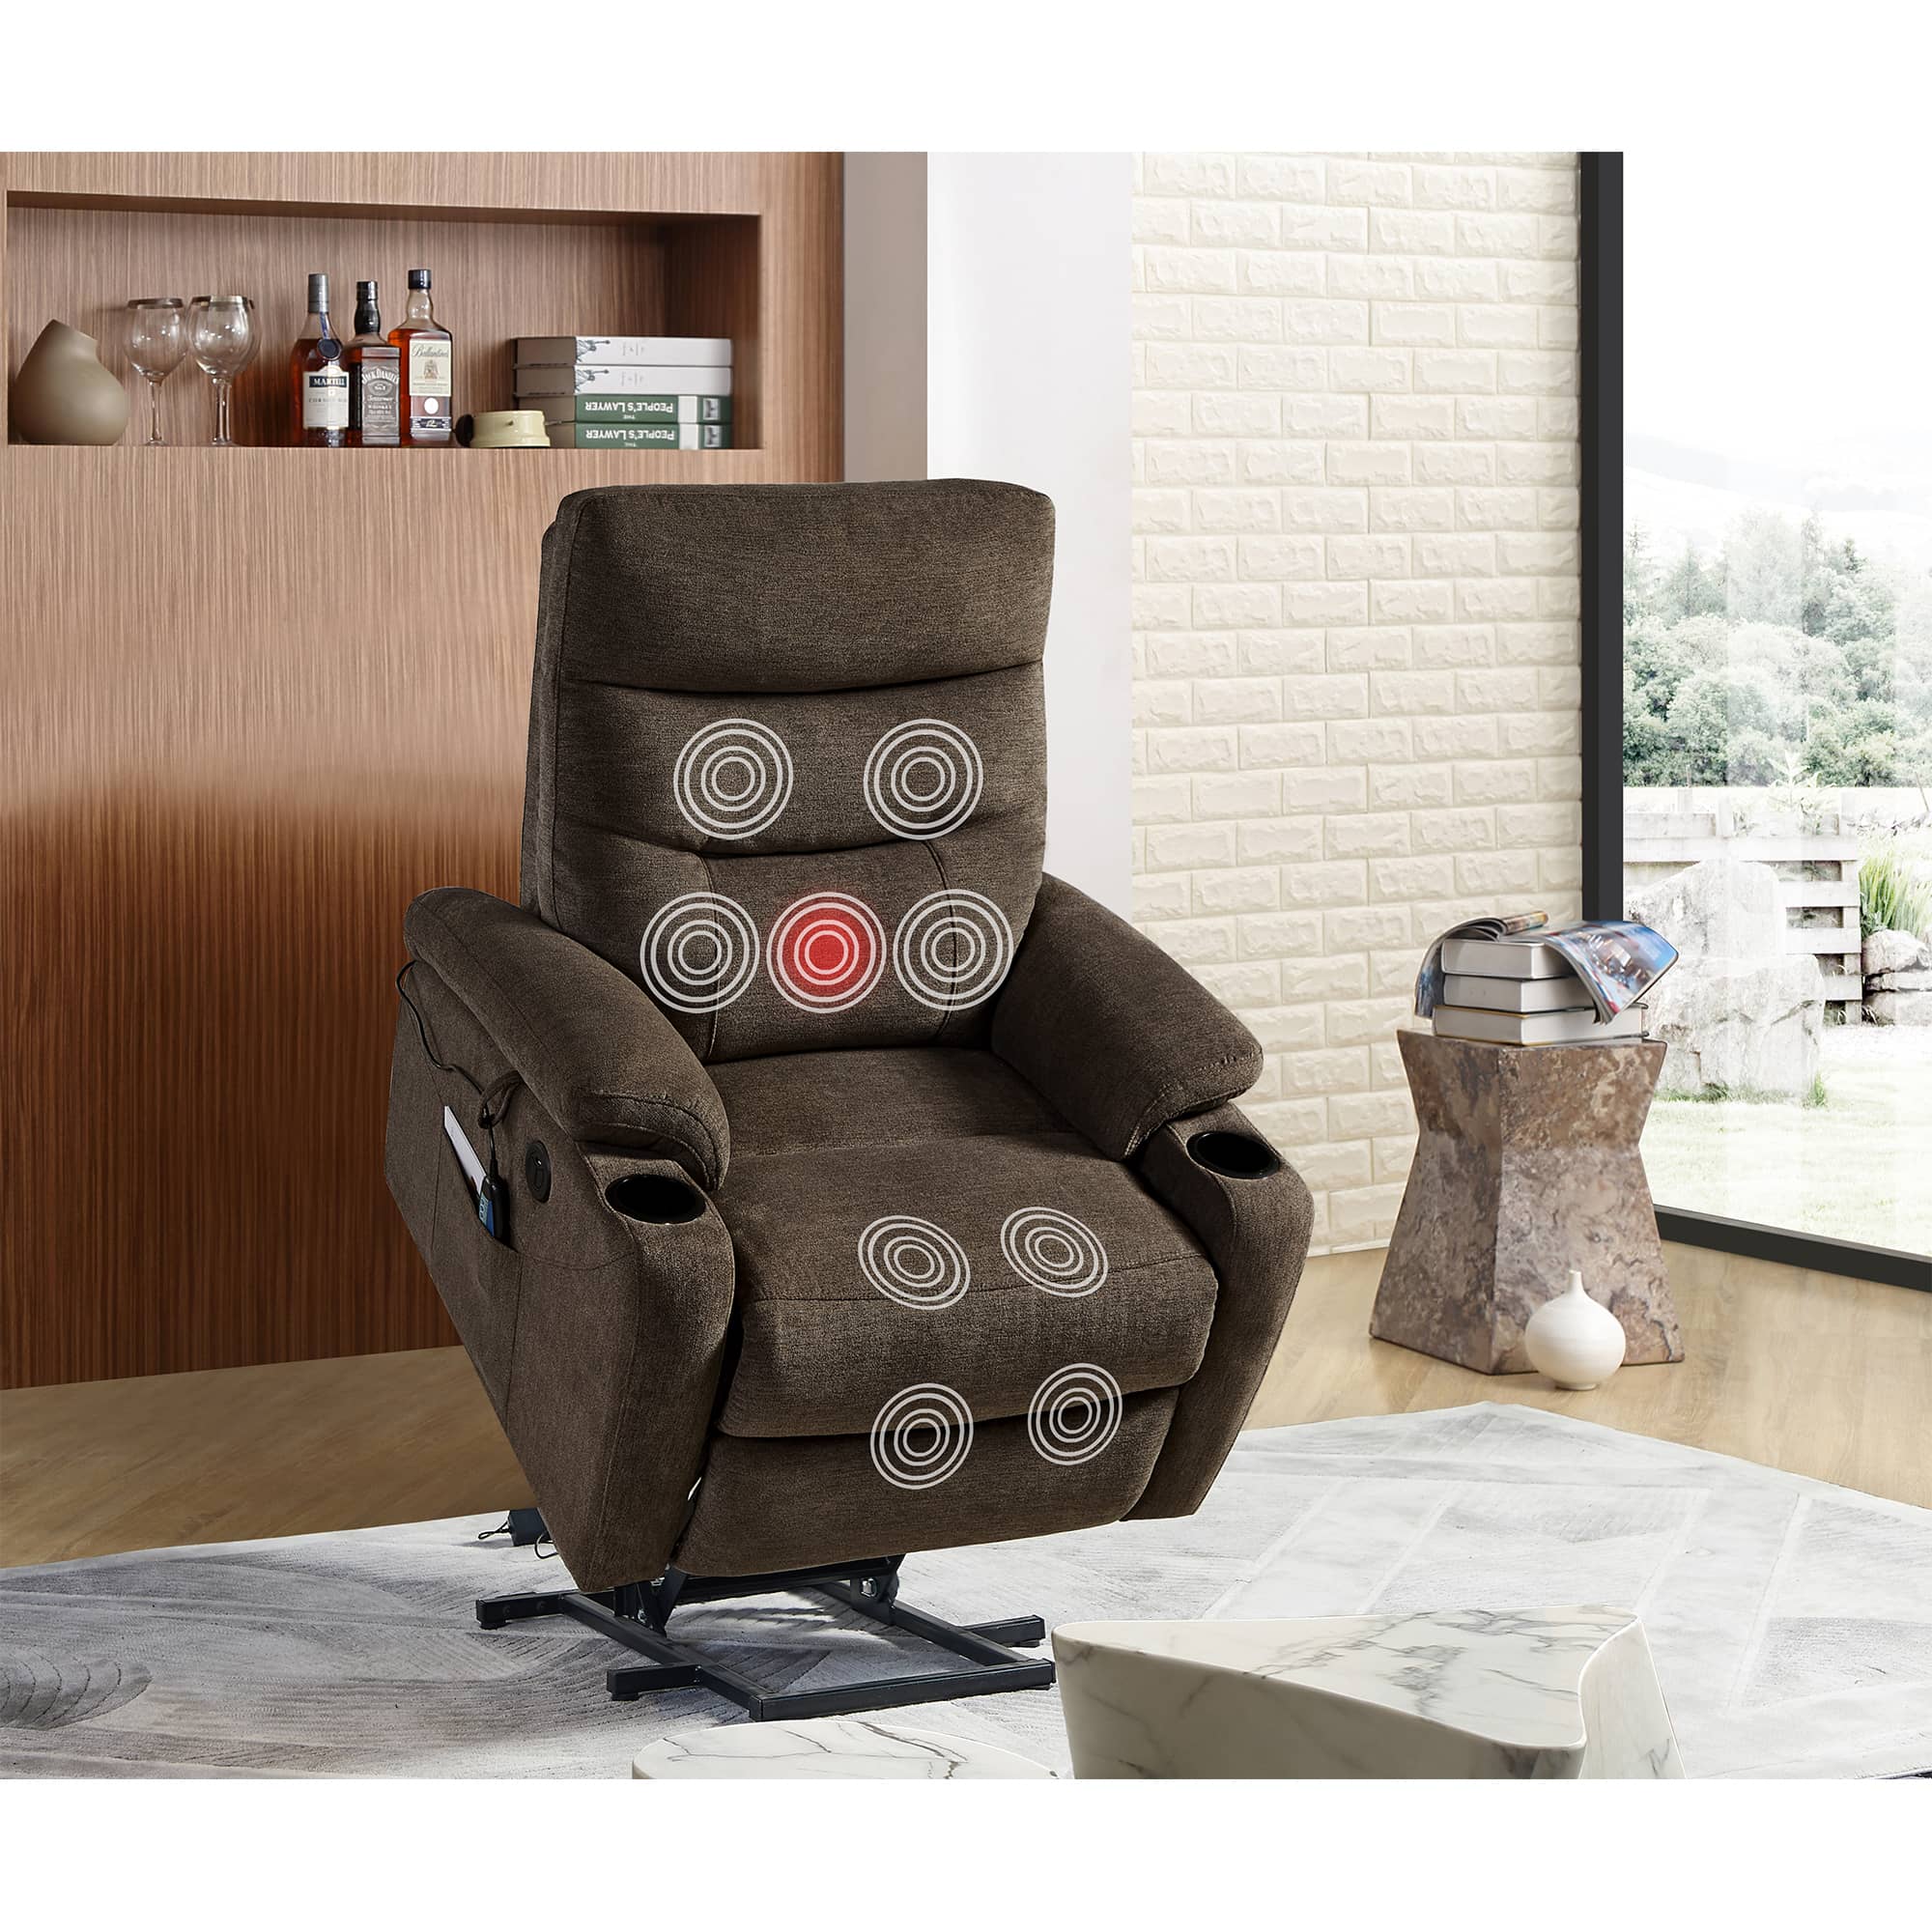 Electric Power Lift Recliner Chair with Massage and Heat, Dark Brown